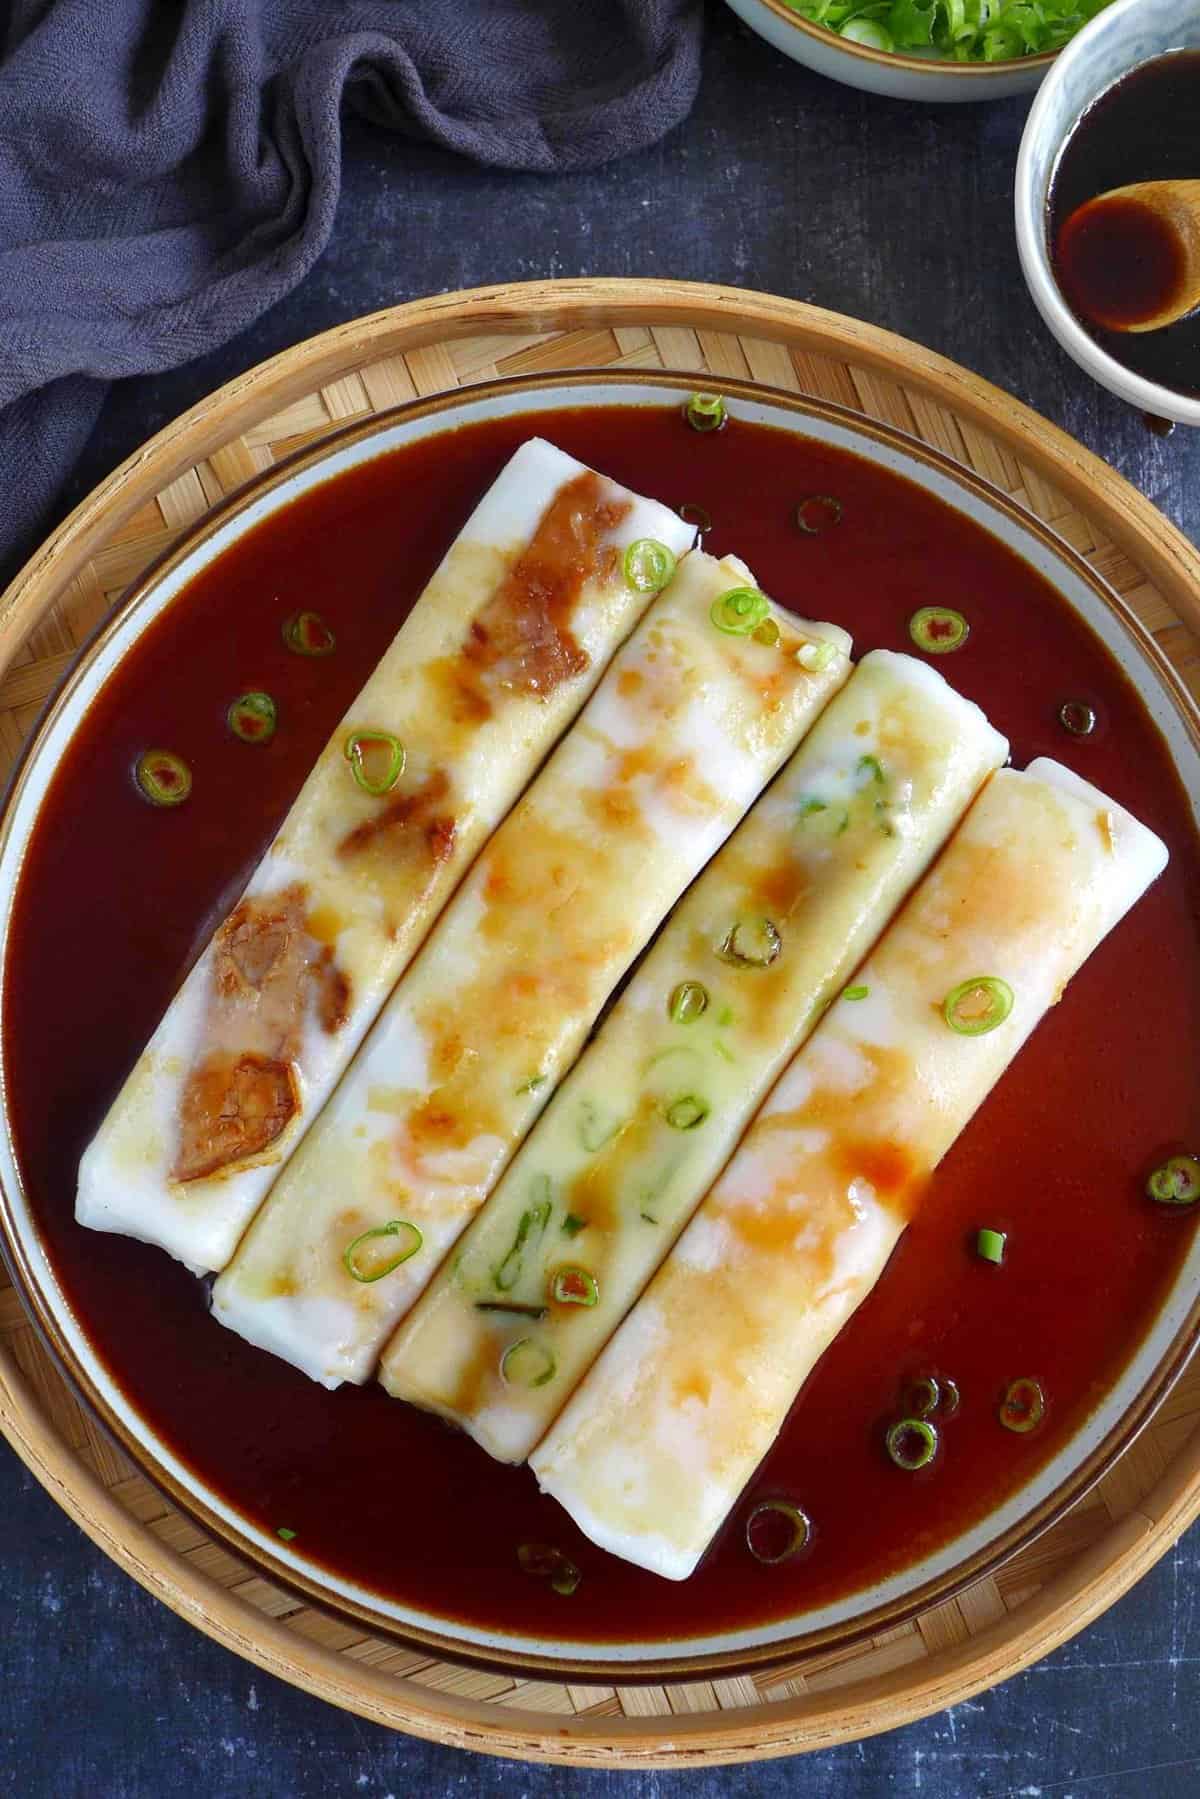 four rolls of Cheung fun with sauce